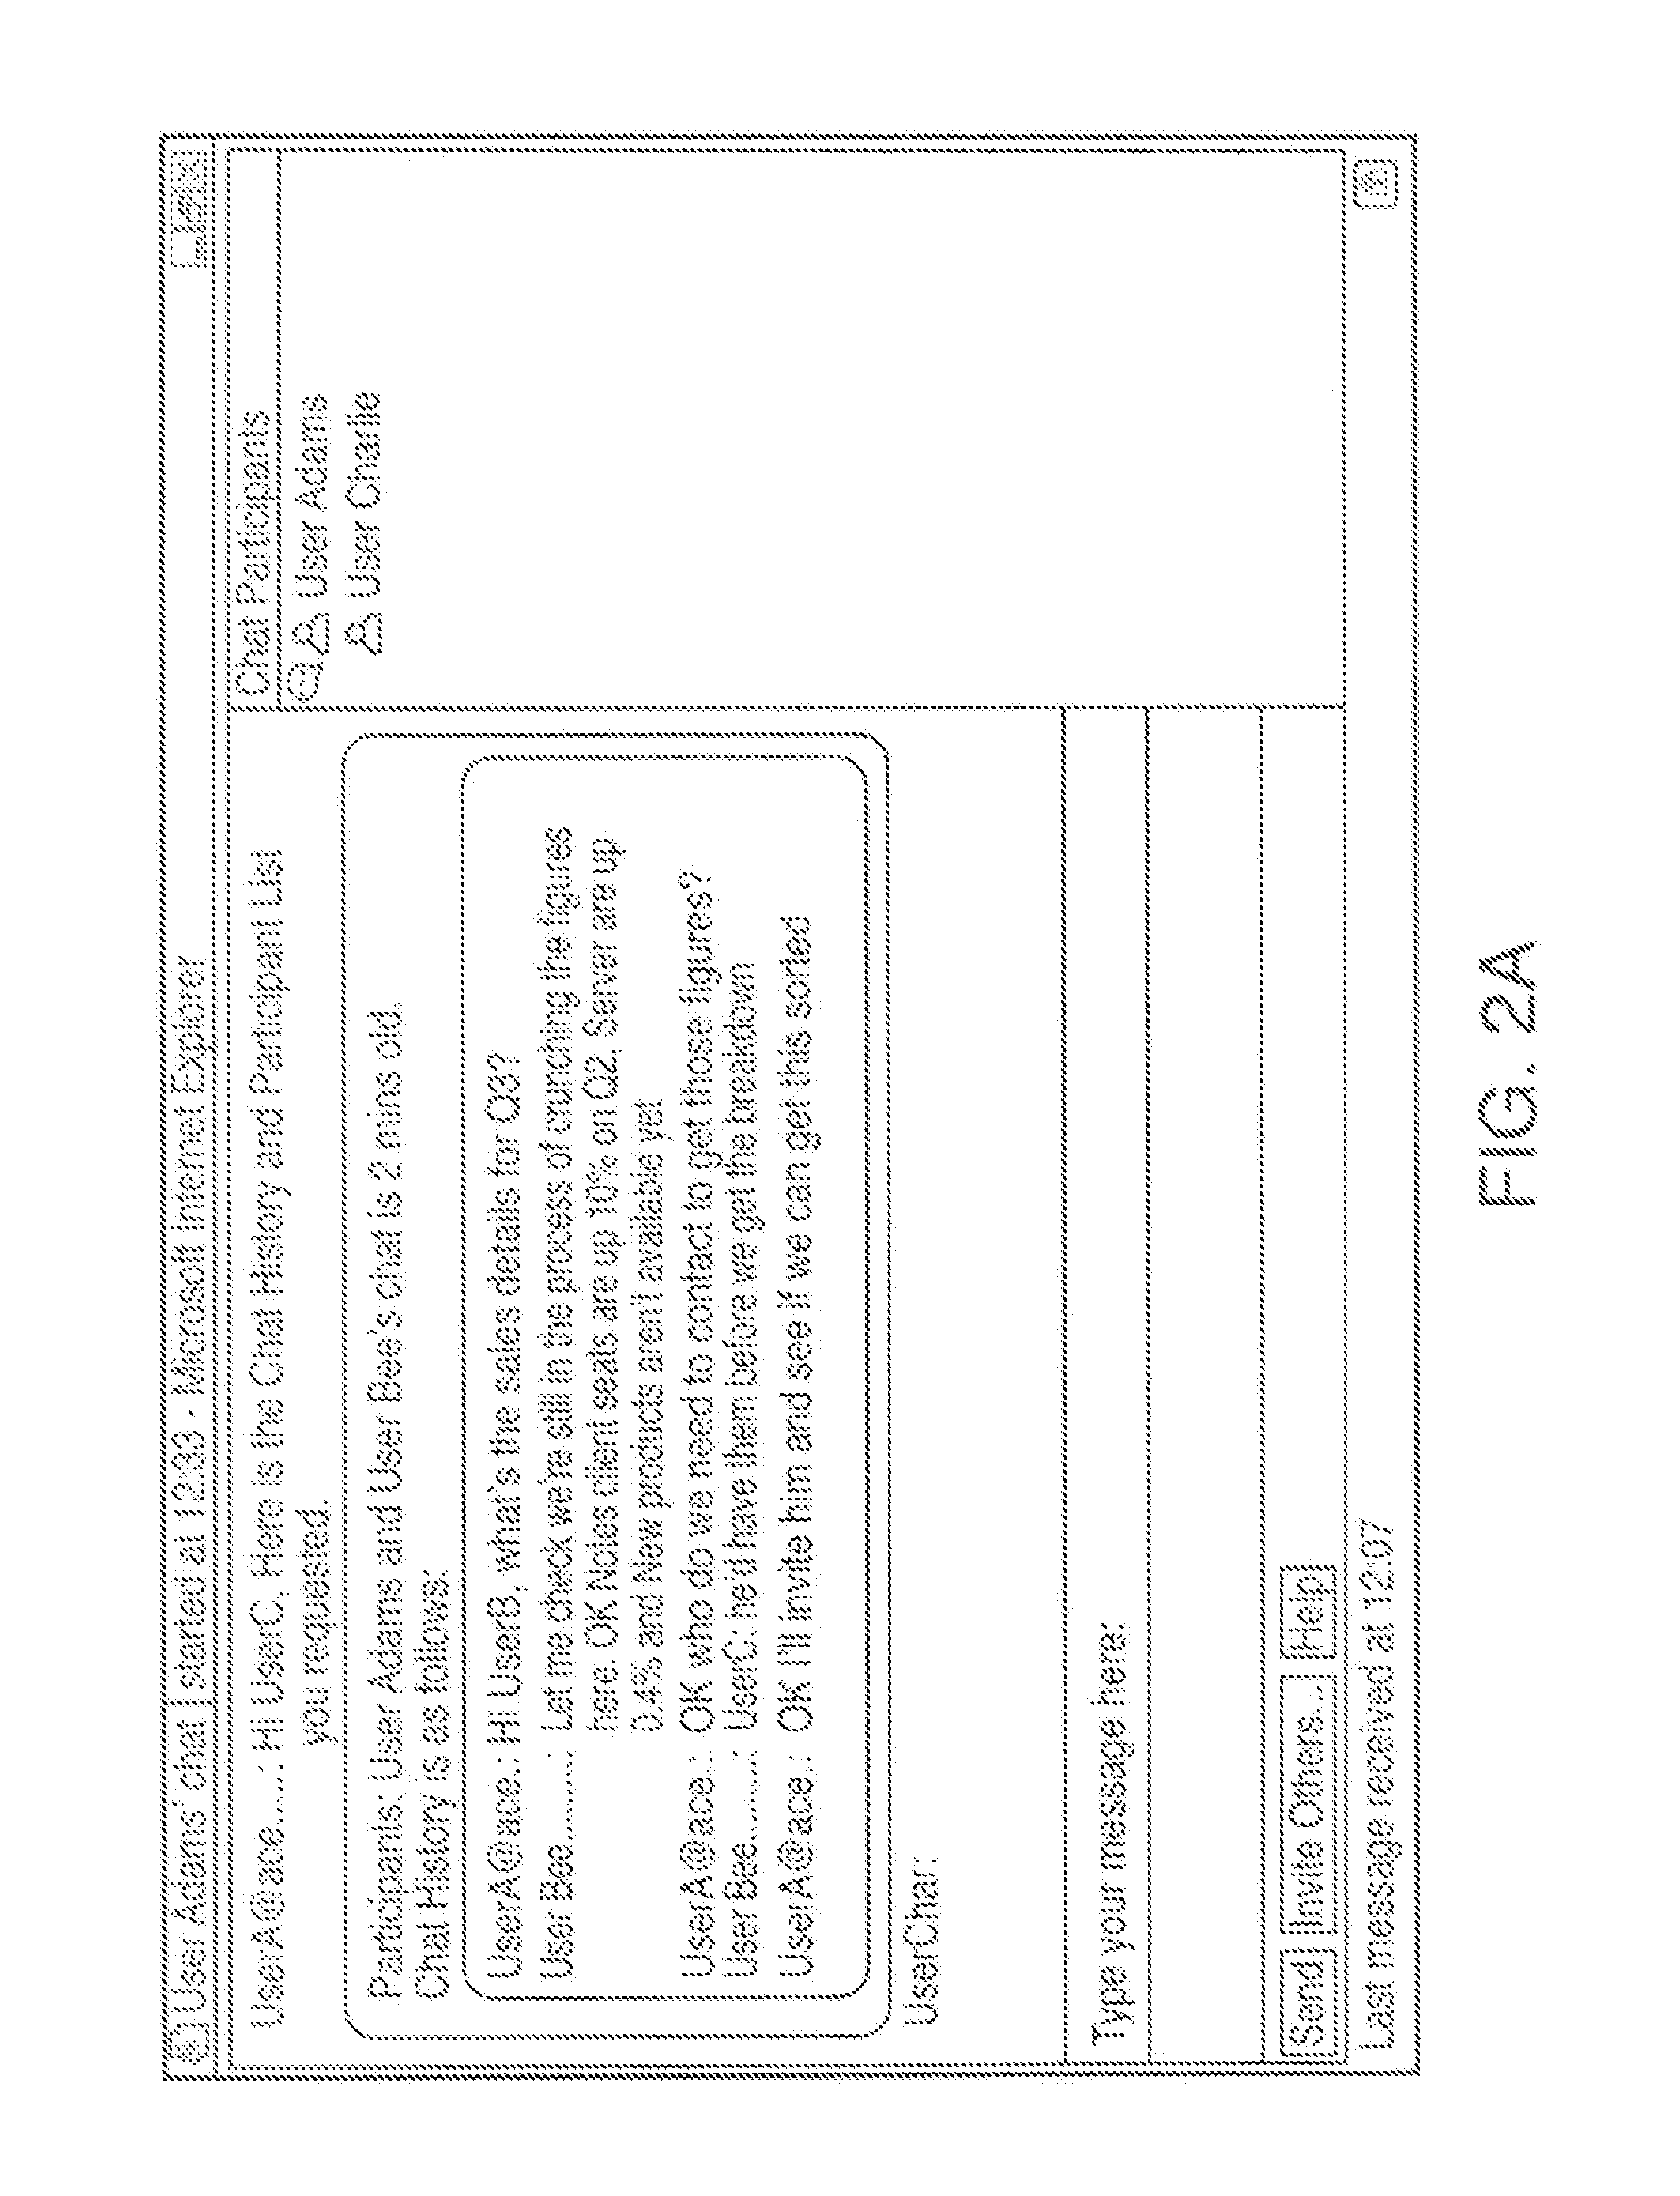 Method of giving the invitee information on an instant messaging meeting prior to acceptance